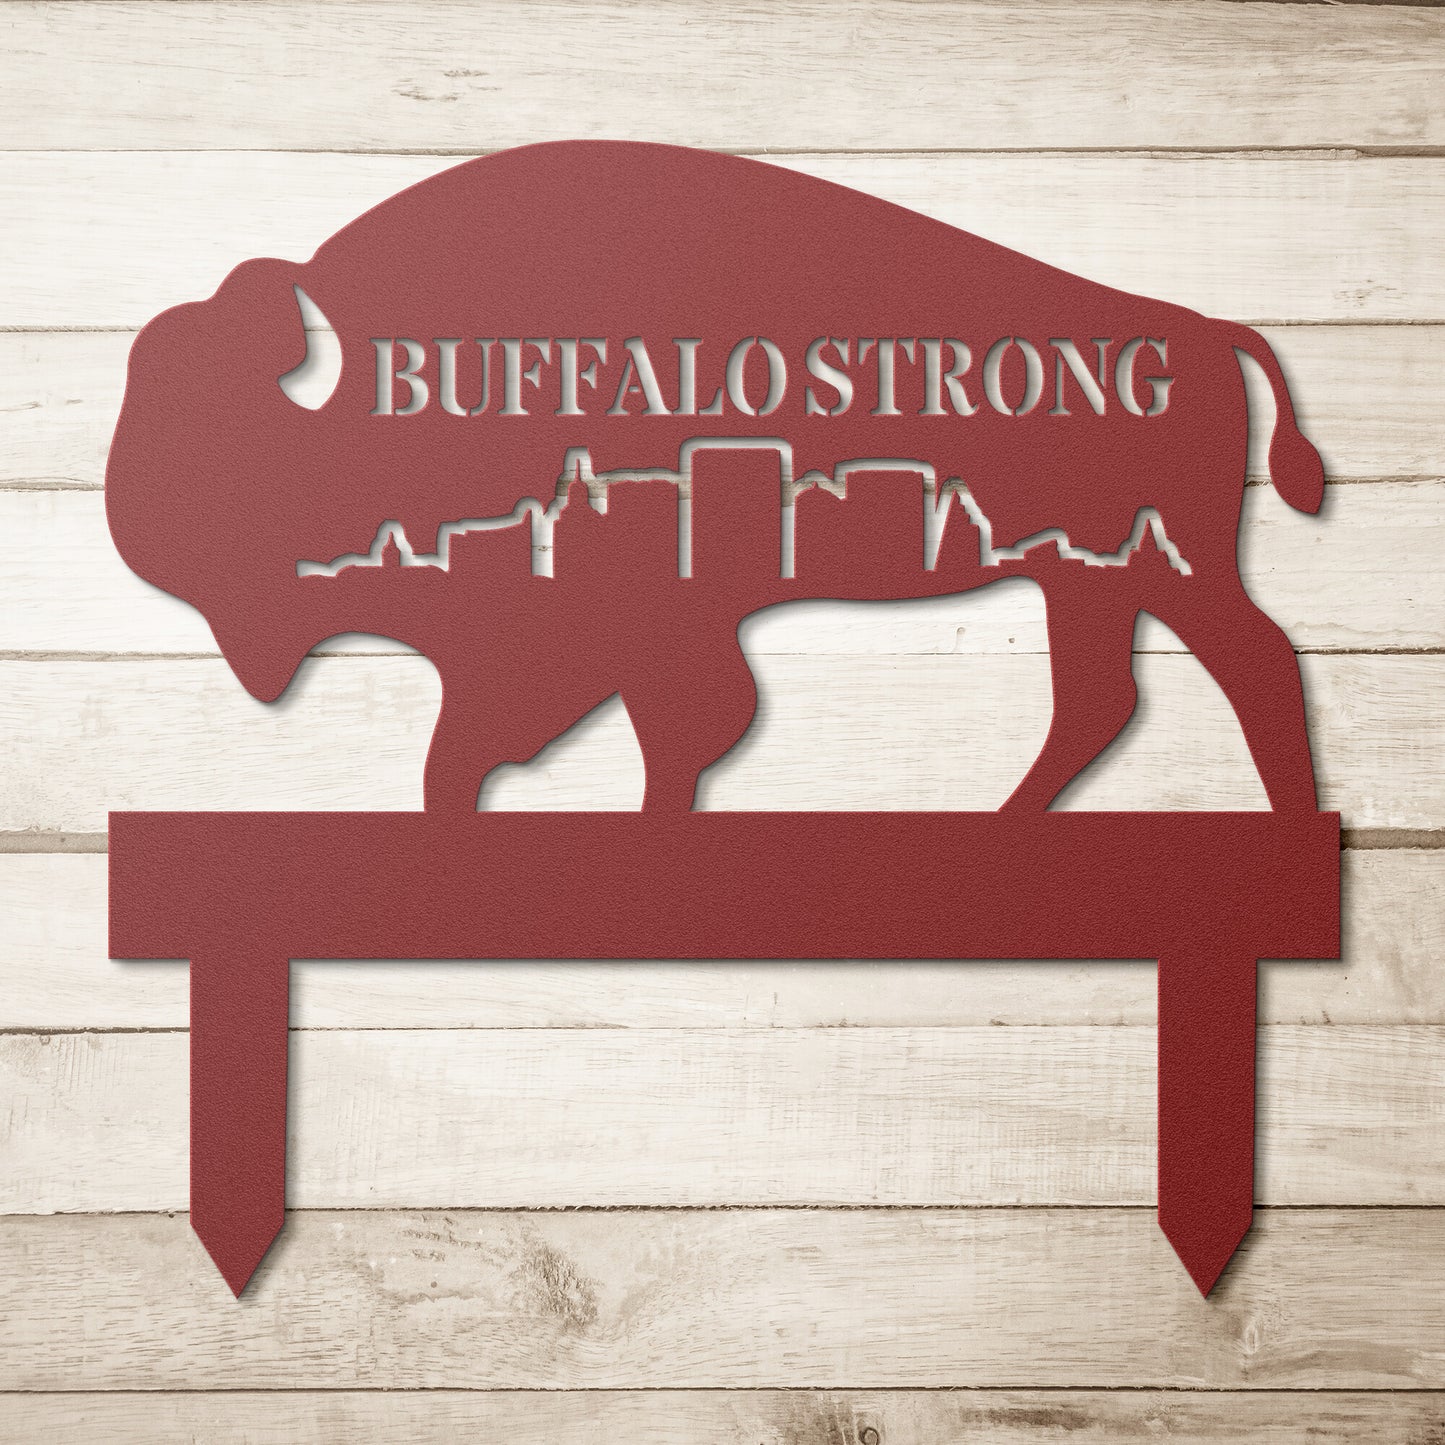 Buffalo Strong metal lawn sign with stakes